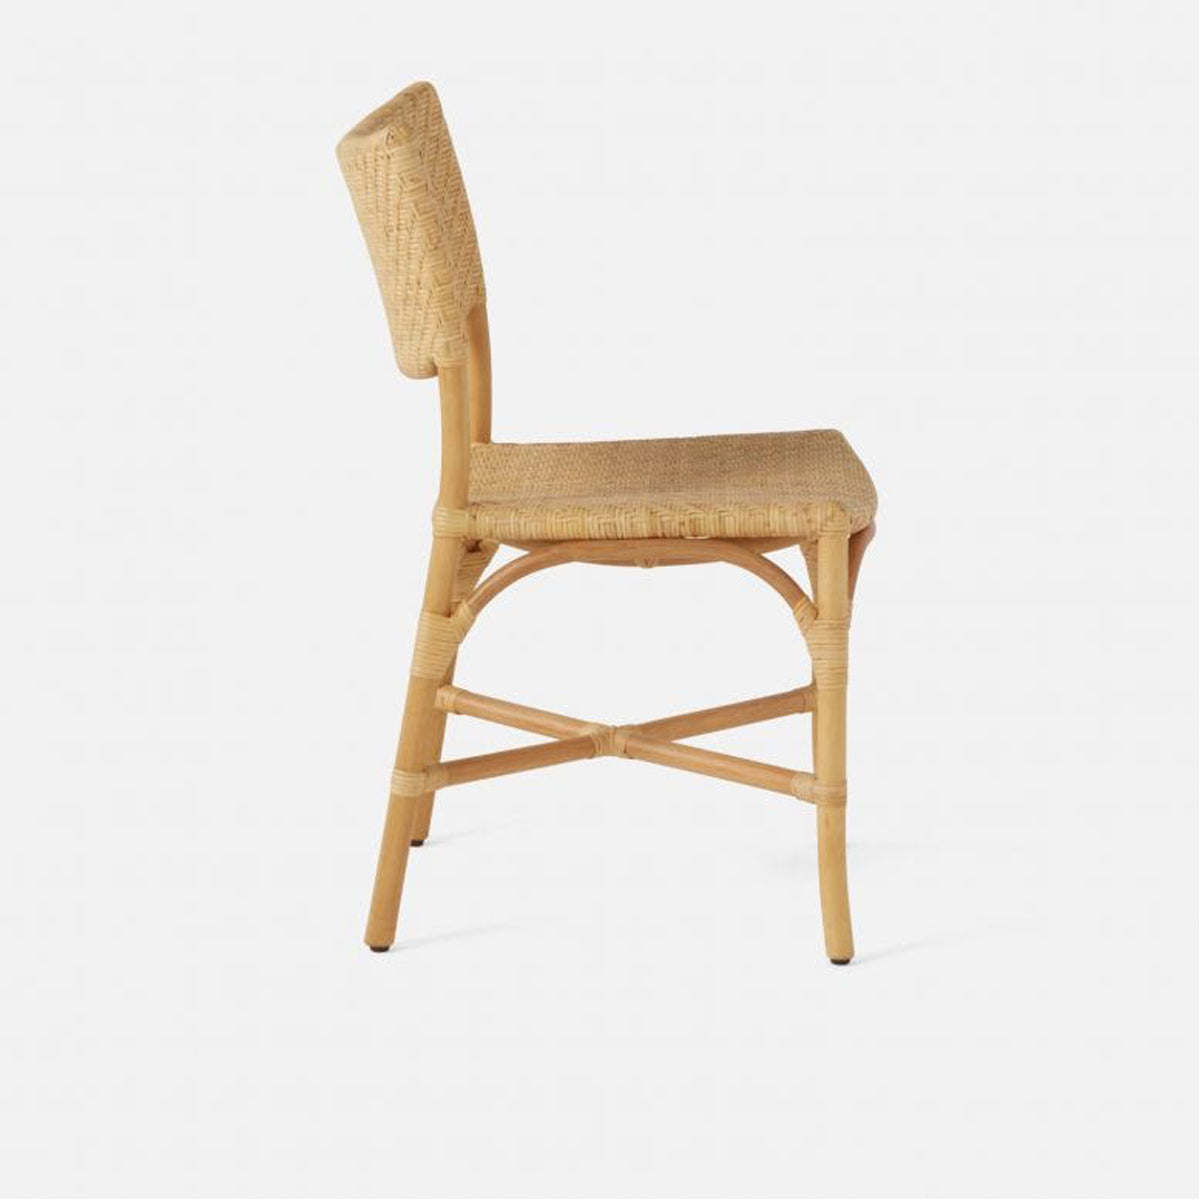 Made Goods Mckinley Bistro Dining Chair with Square Seat and Back